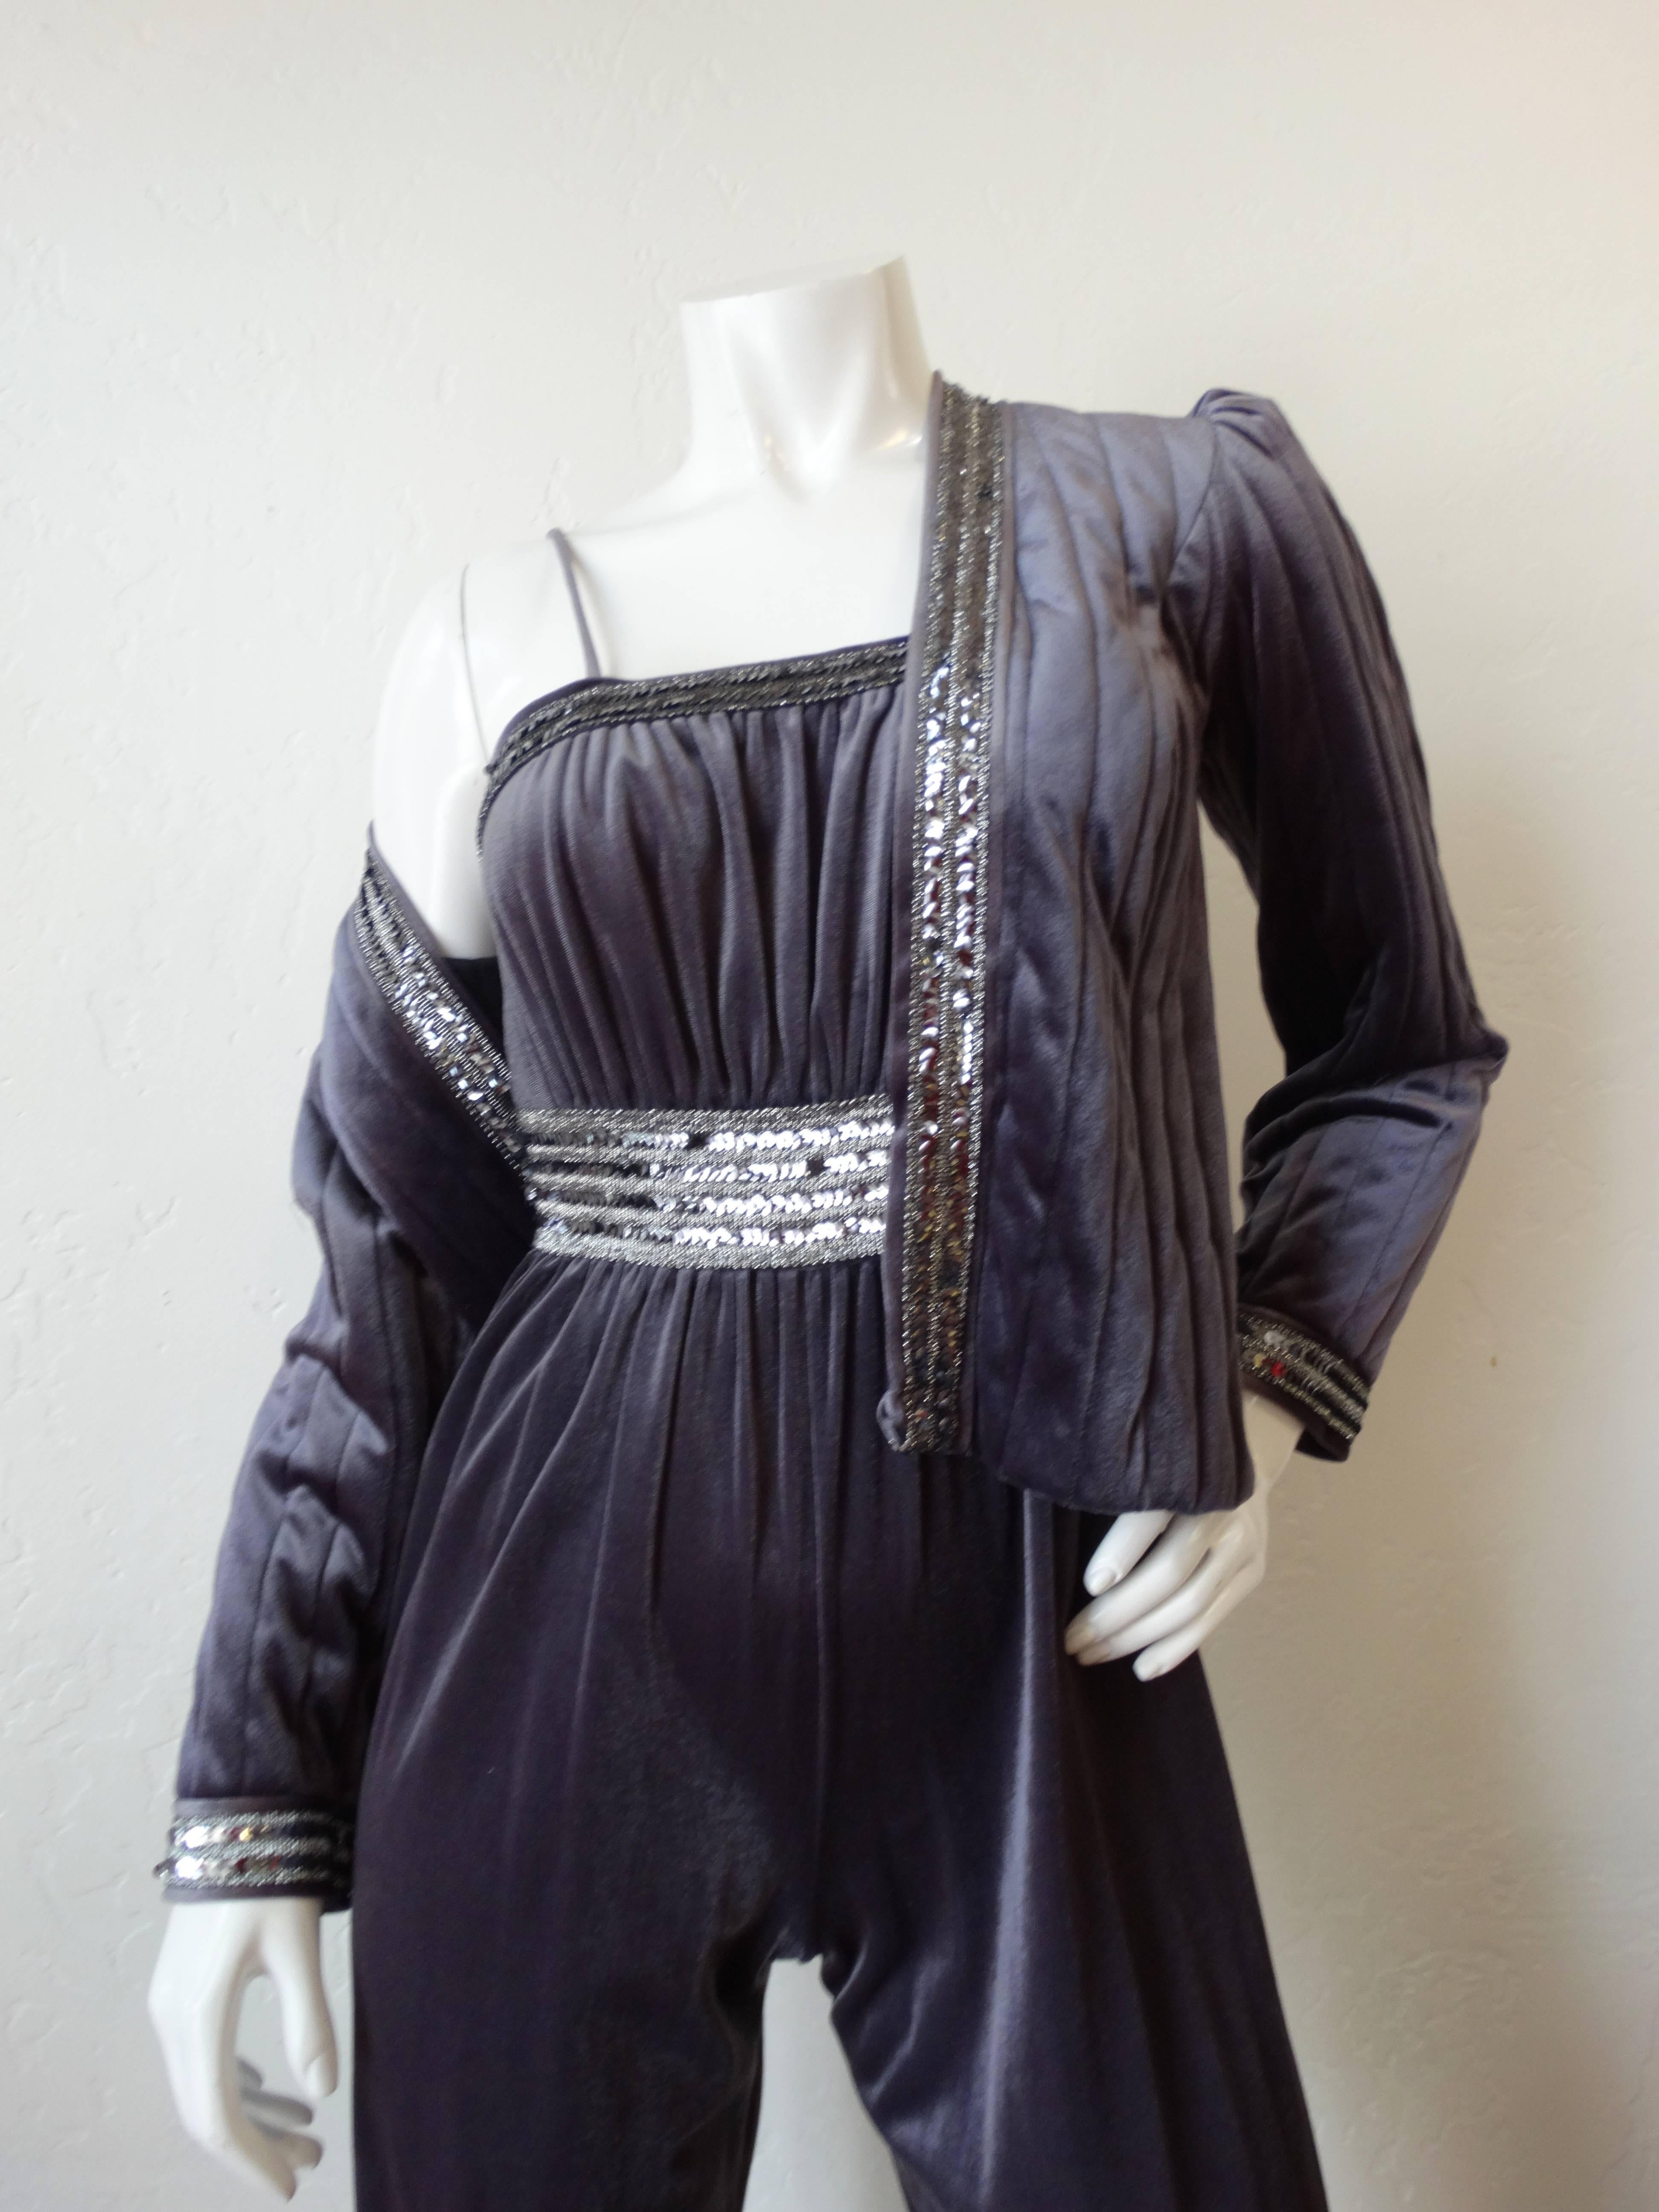 Channel your inner disco queen with our amazing 1980s velvet jumpsuit! Made of a soft, shiny grey velvet accented with silver sequin band around the waist and trim of the jacket. Jumpsuit has a flattering gathered bust with sexy spaghetti straps.